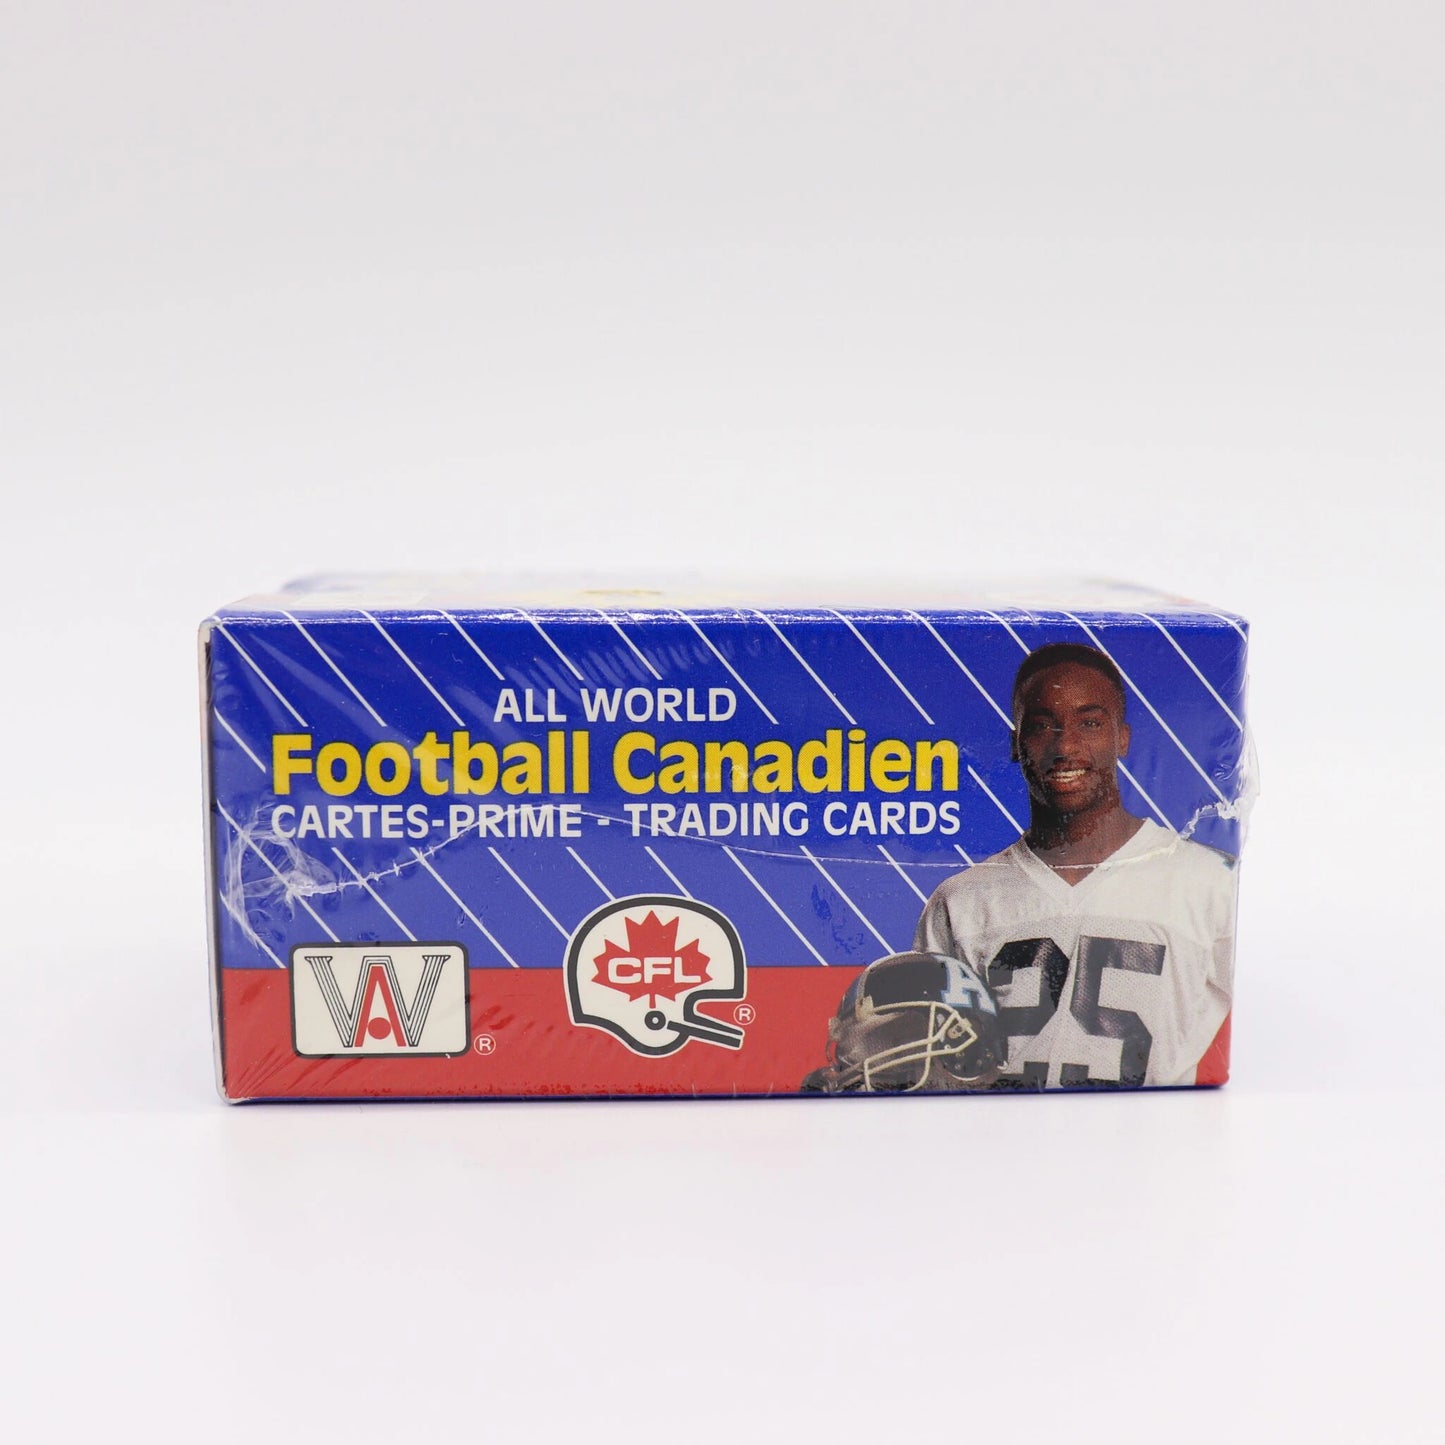 1991 Factory-Sealed Box Football Canadien (CFL) Complete Set (110 Cards),Mint